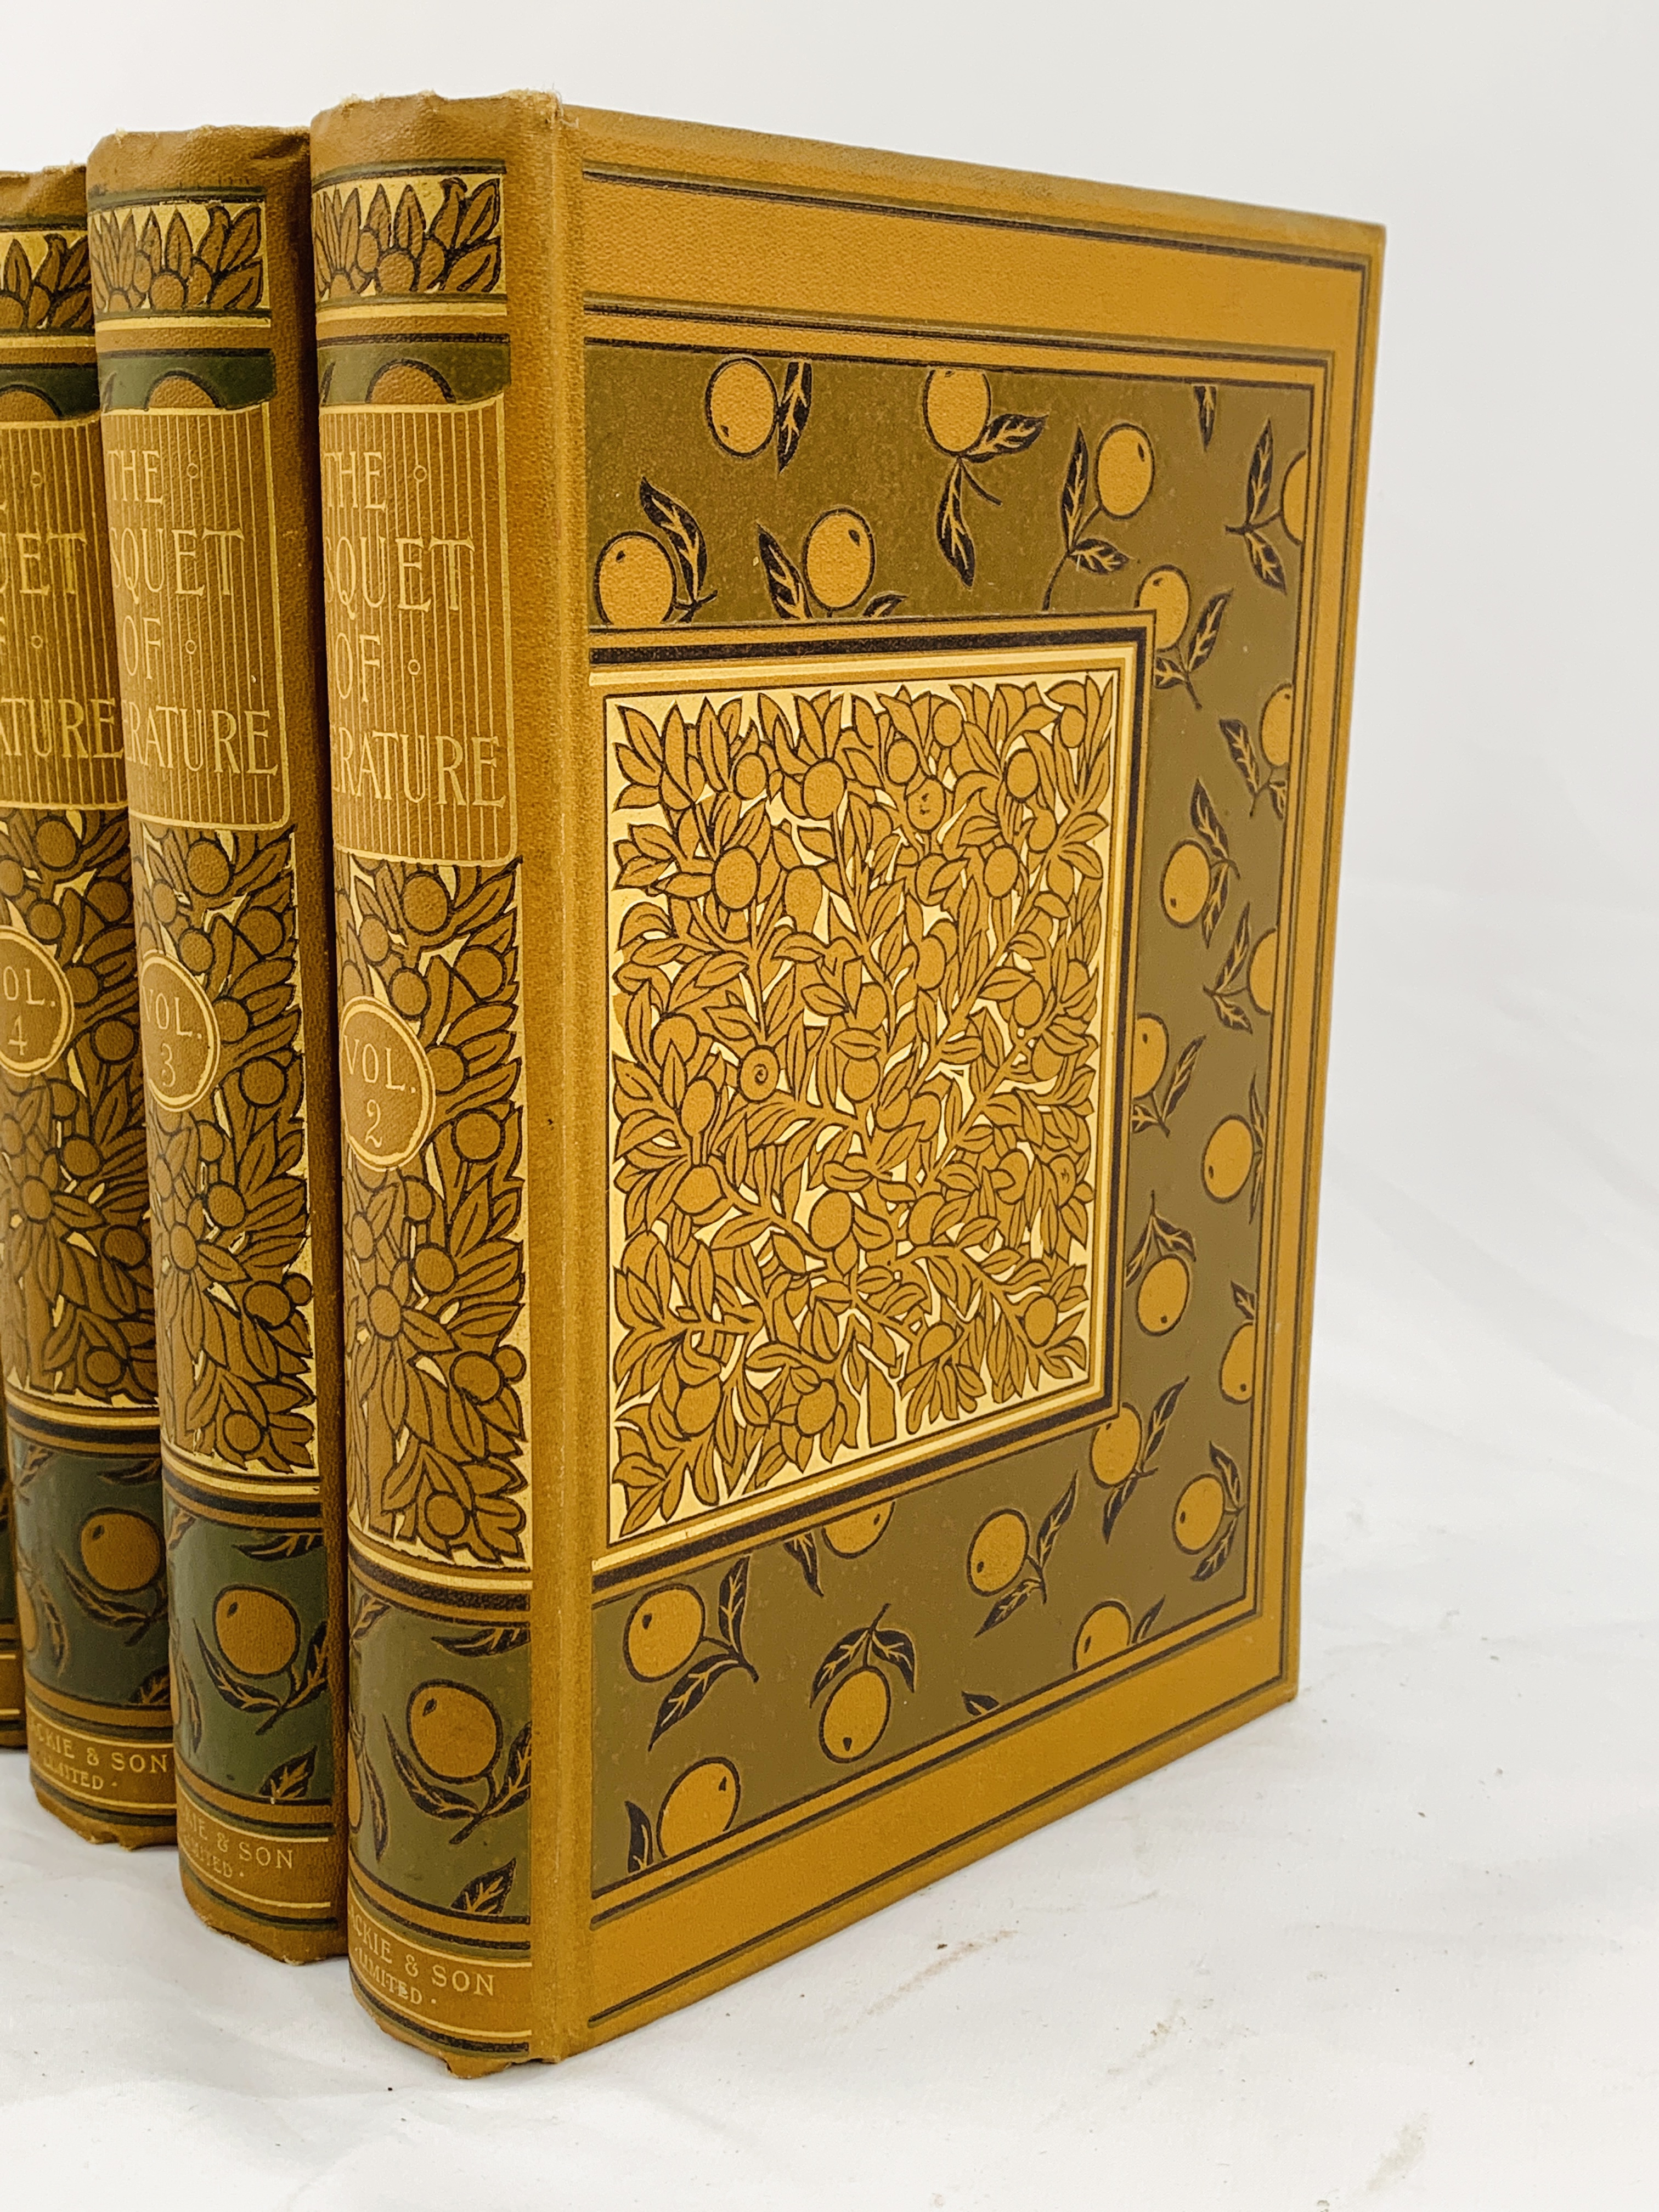 Casquet of Literature, 5 volumes in Art Nouveau cloth bindings - Image 2 of 4